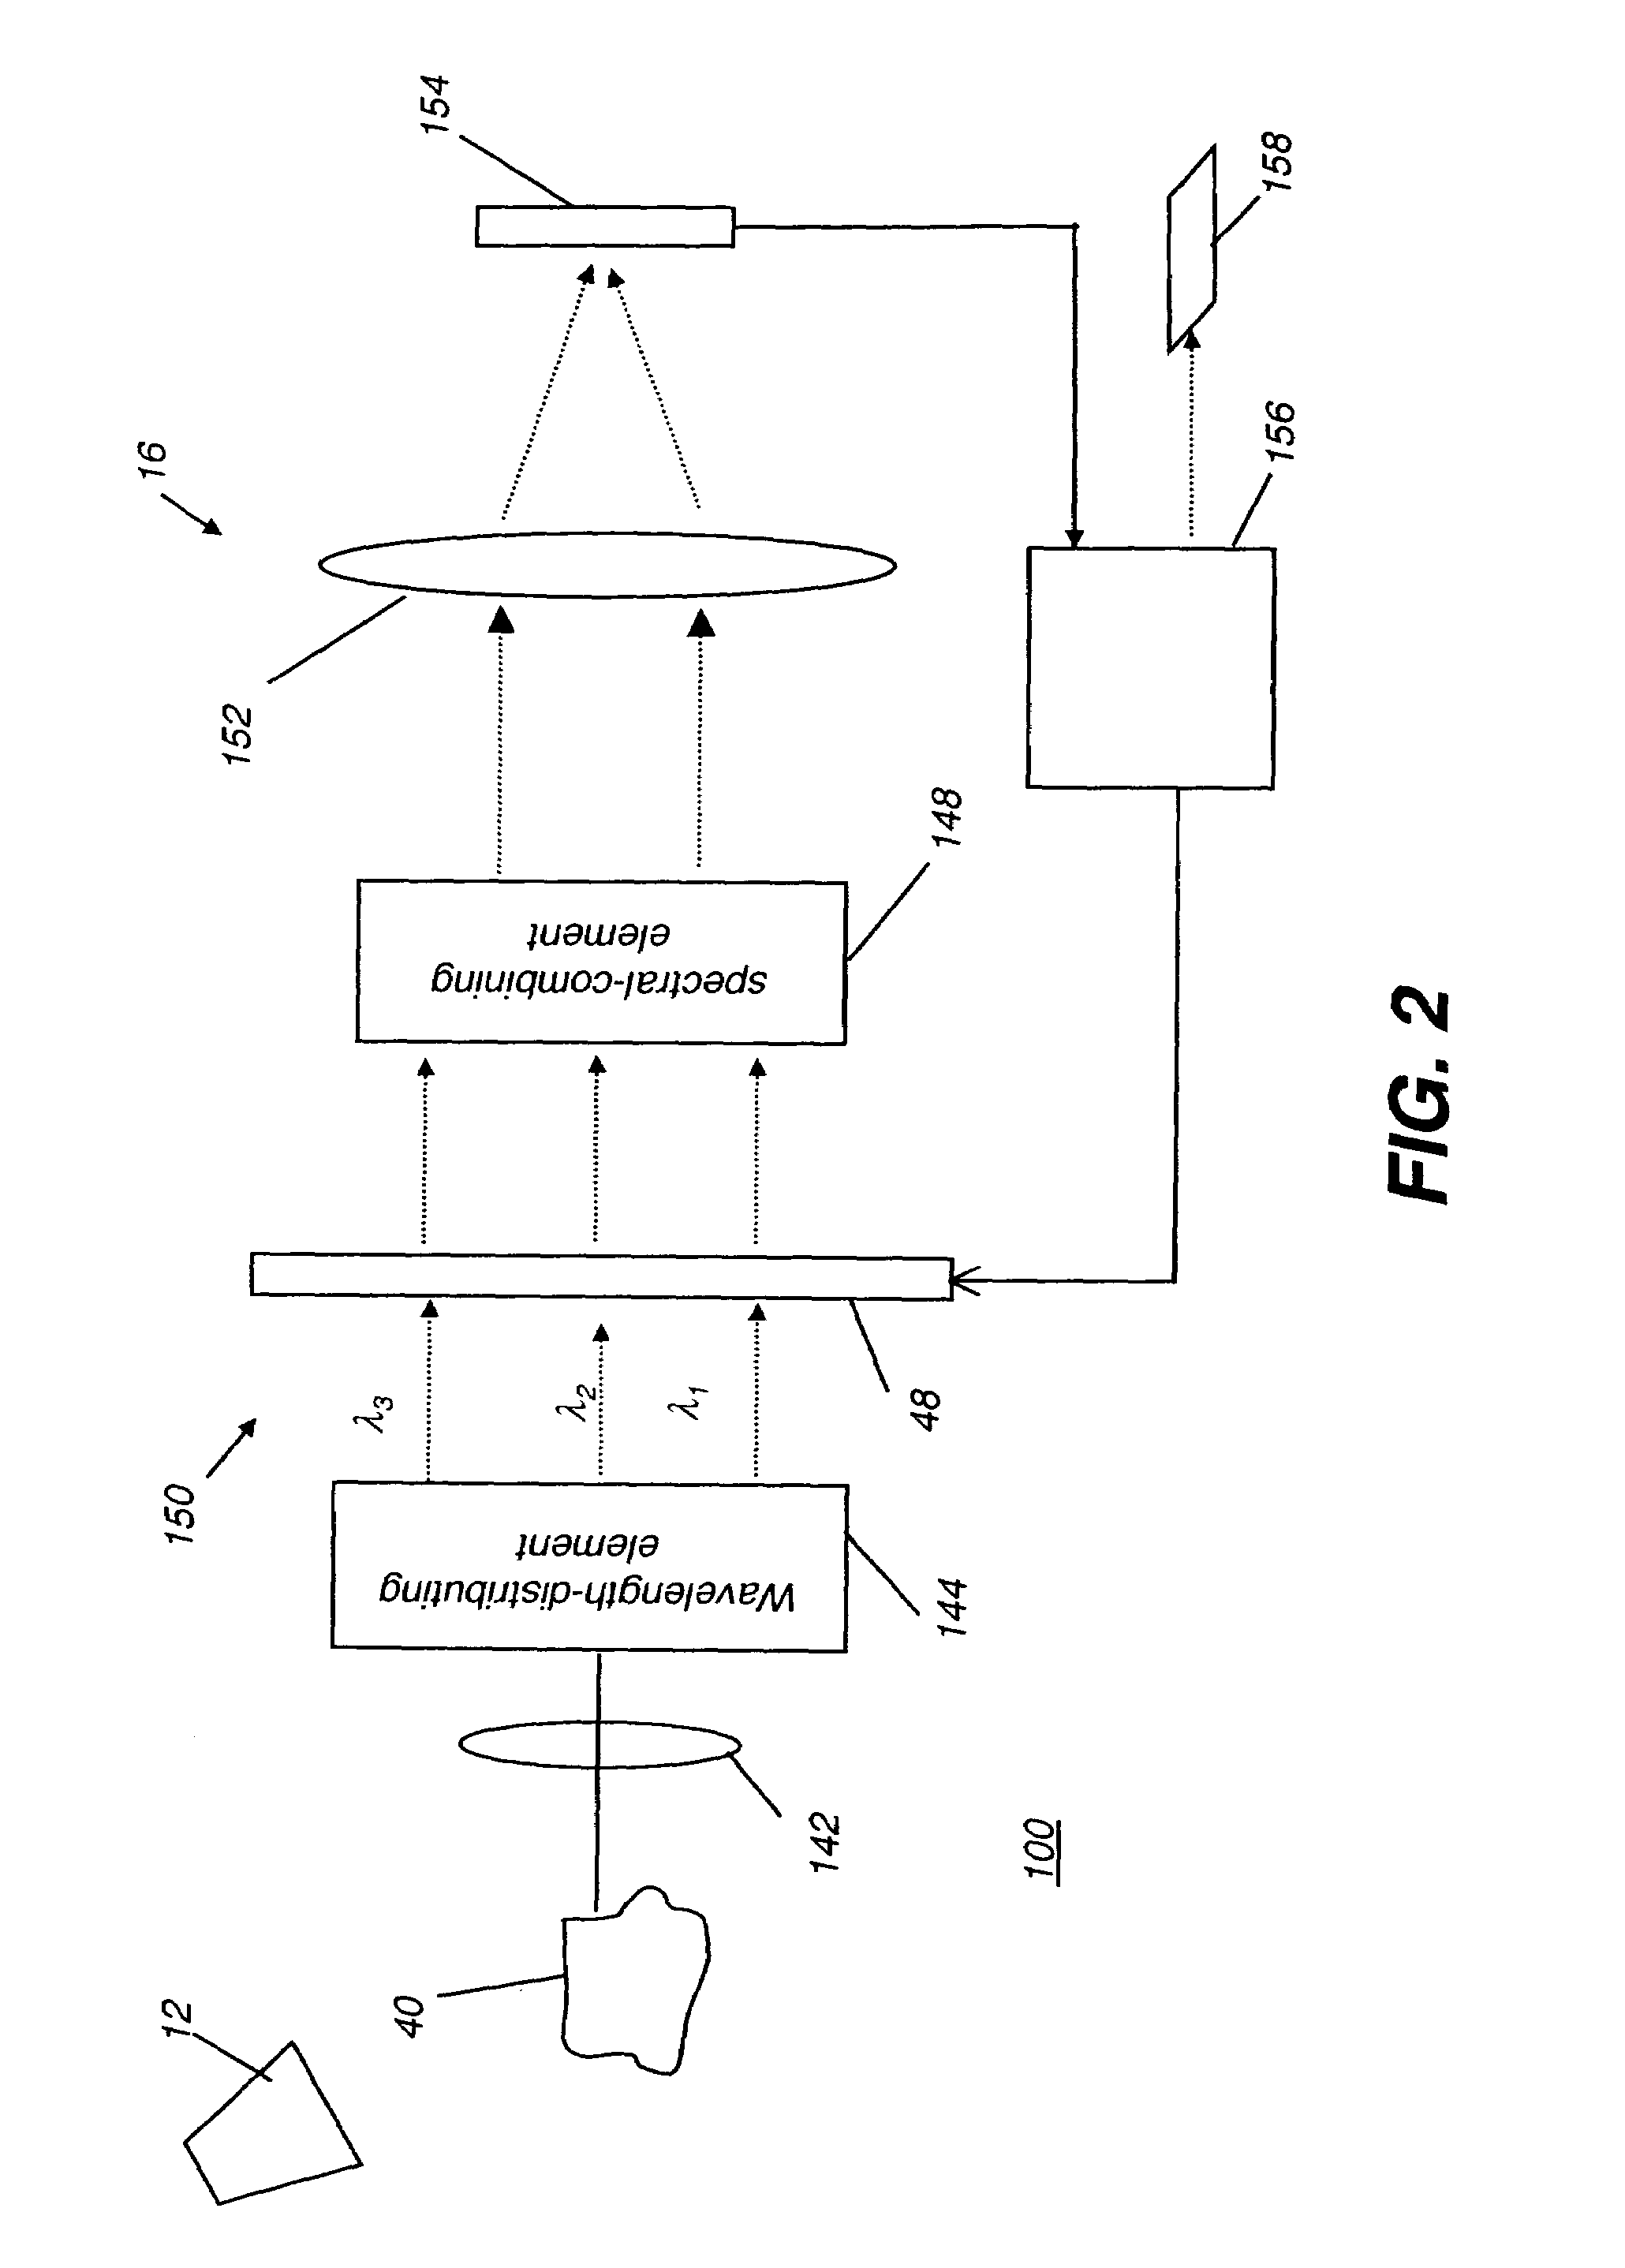 Programmable spectral imaging system